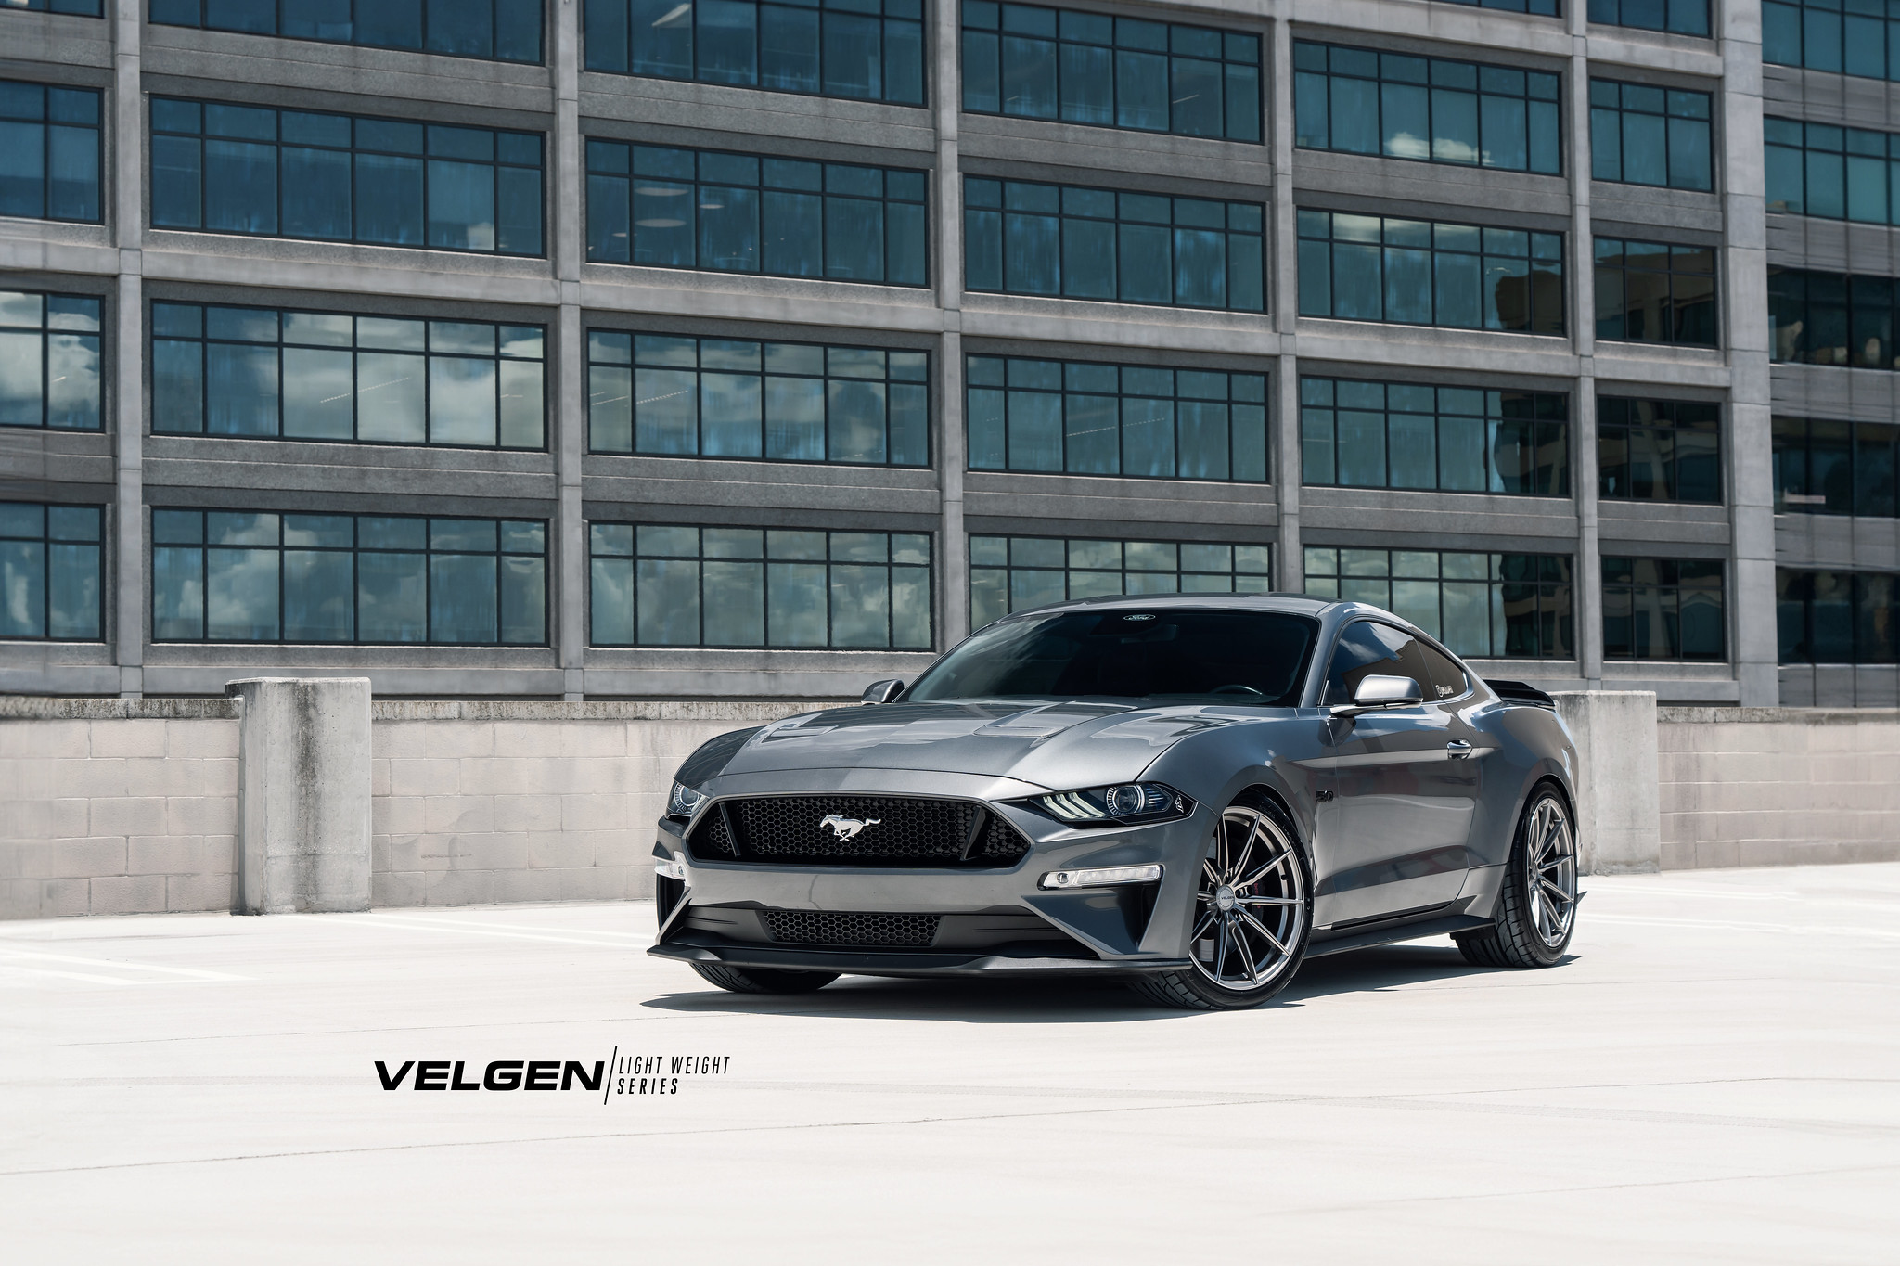 S650 Mustang 19" 20" Velgen Flow Forged Concave Wheels Mustang S650 - Vibe Motorsports Official Thread 53054708032_40038613fa_k